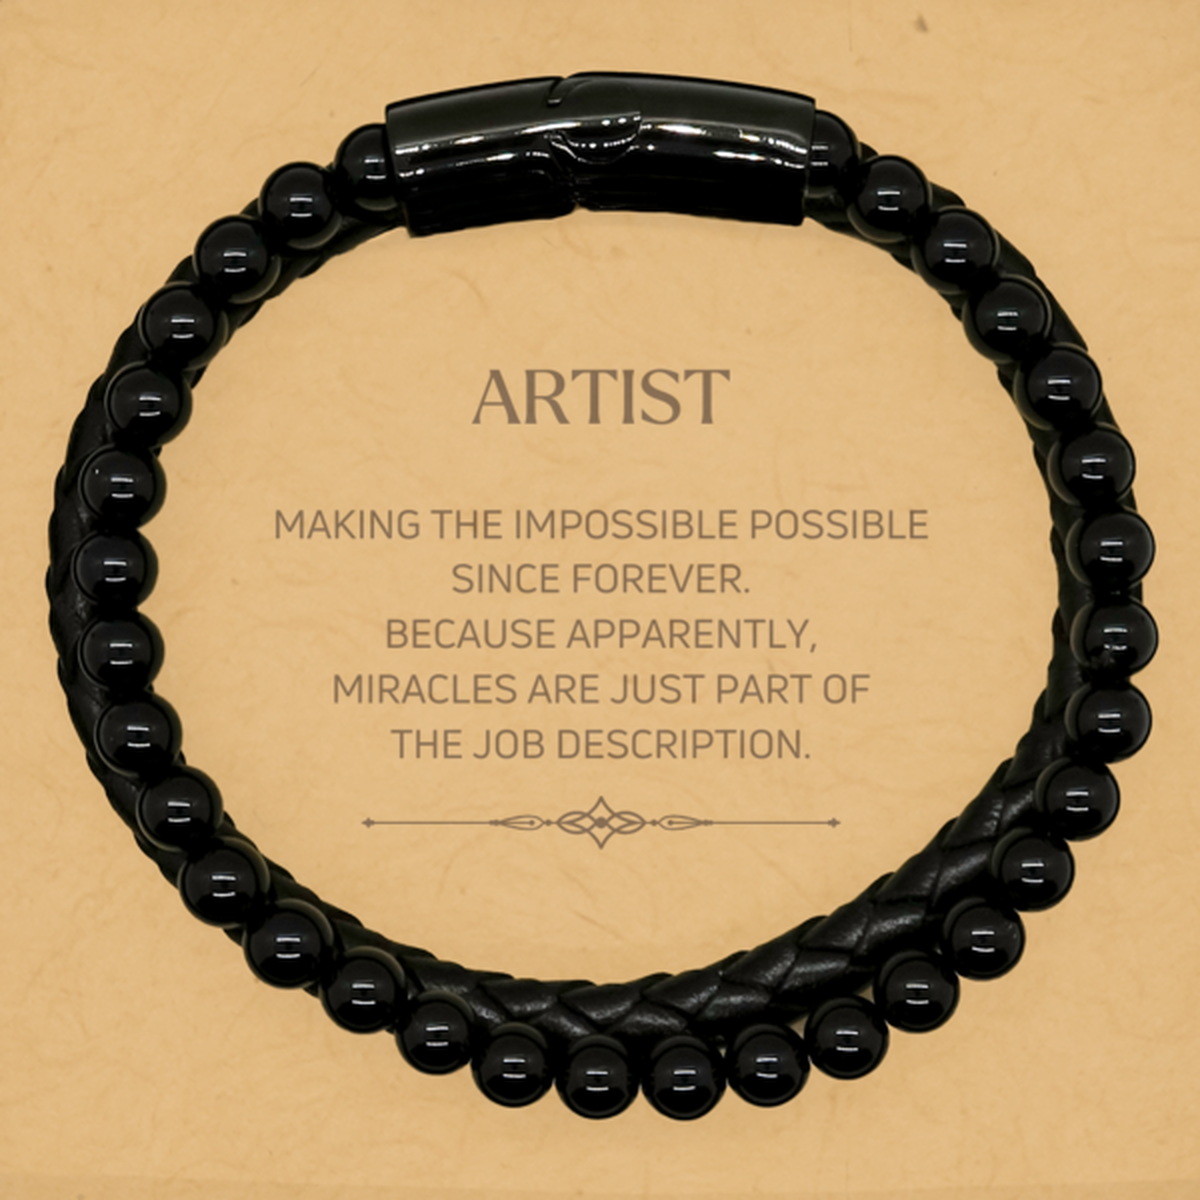 Funny Artist Gifts, Miracles are just part of the job description, Inspirational Birthday Stone Leather Bracelets For Artist, Men, Women, Coworkers, Friends, Boss